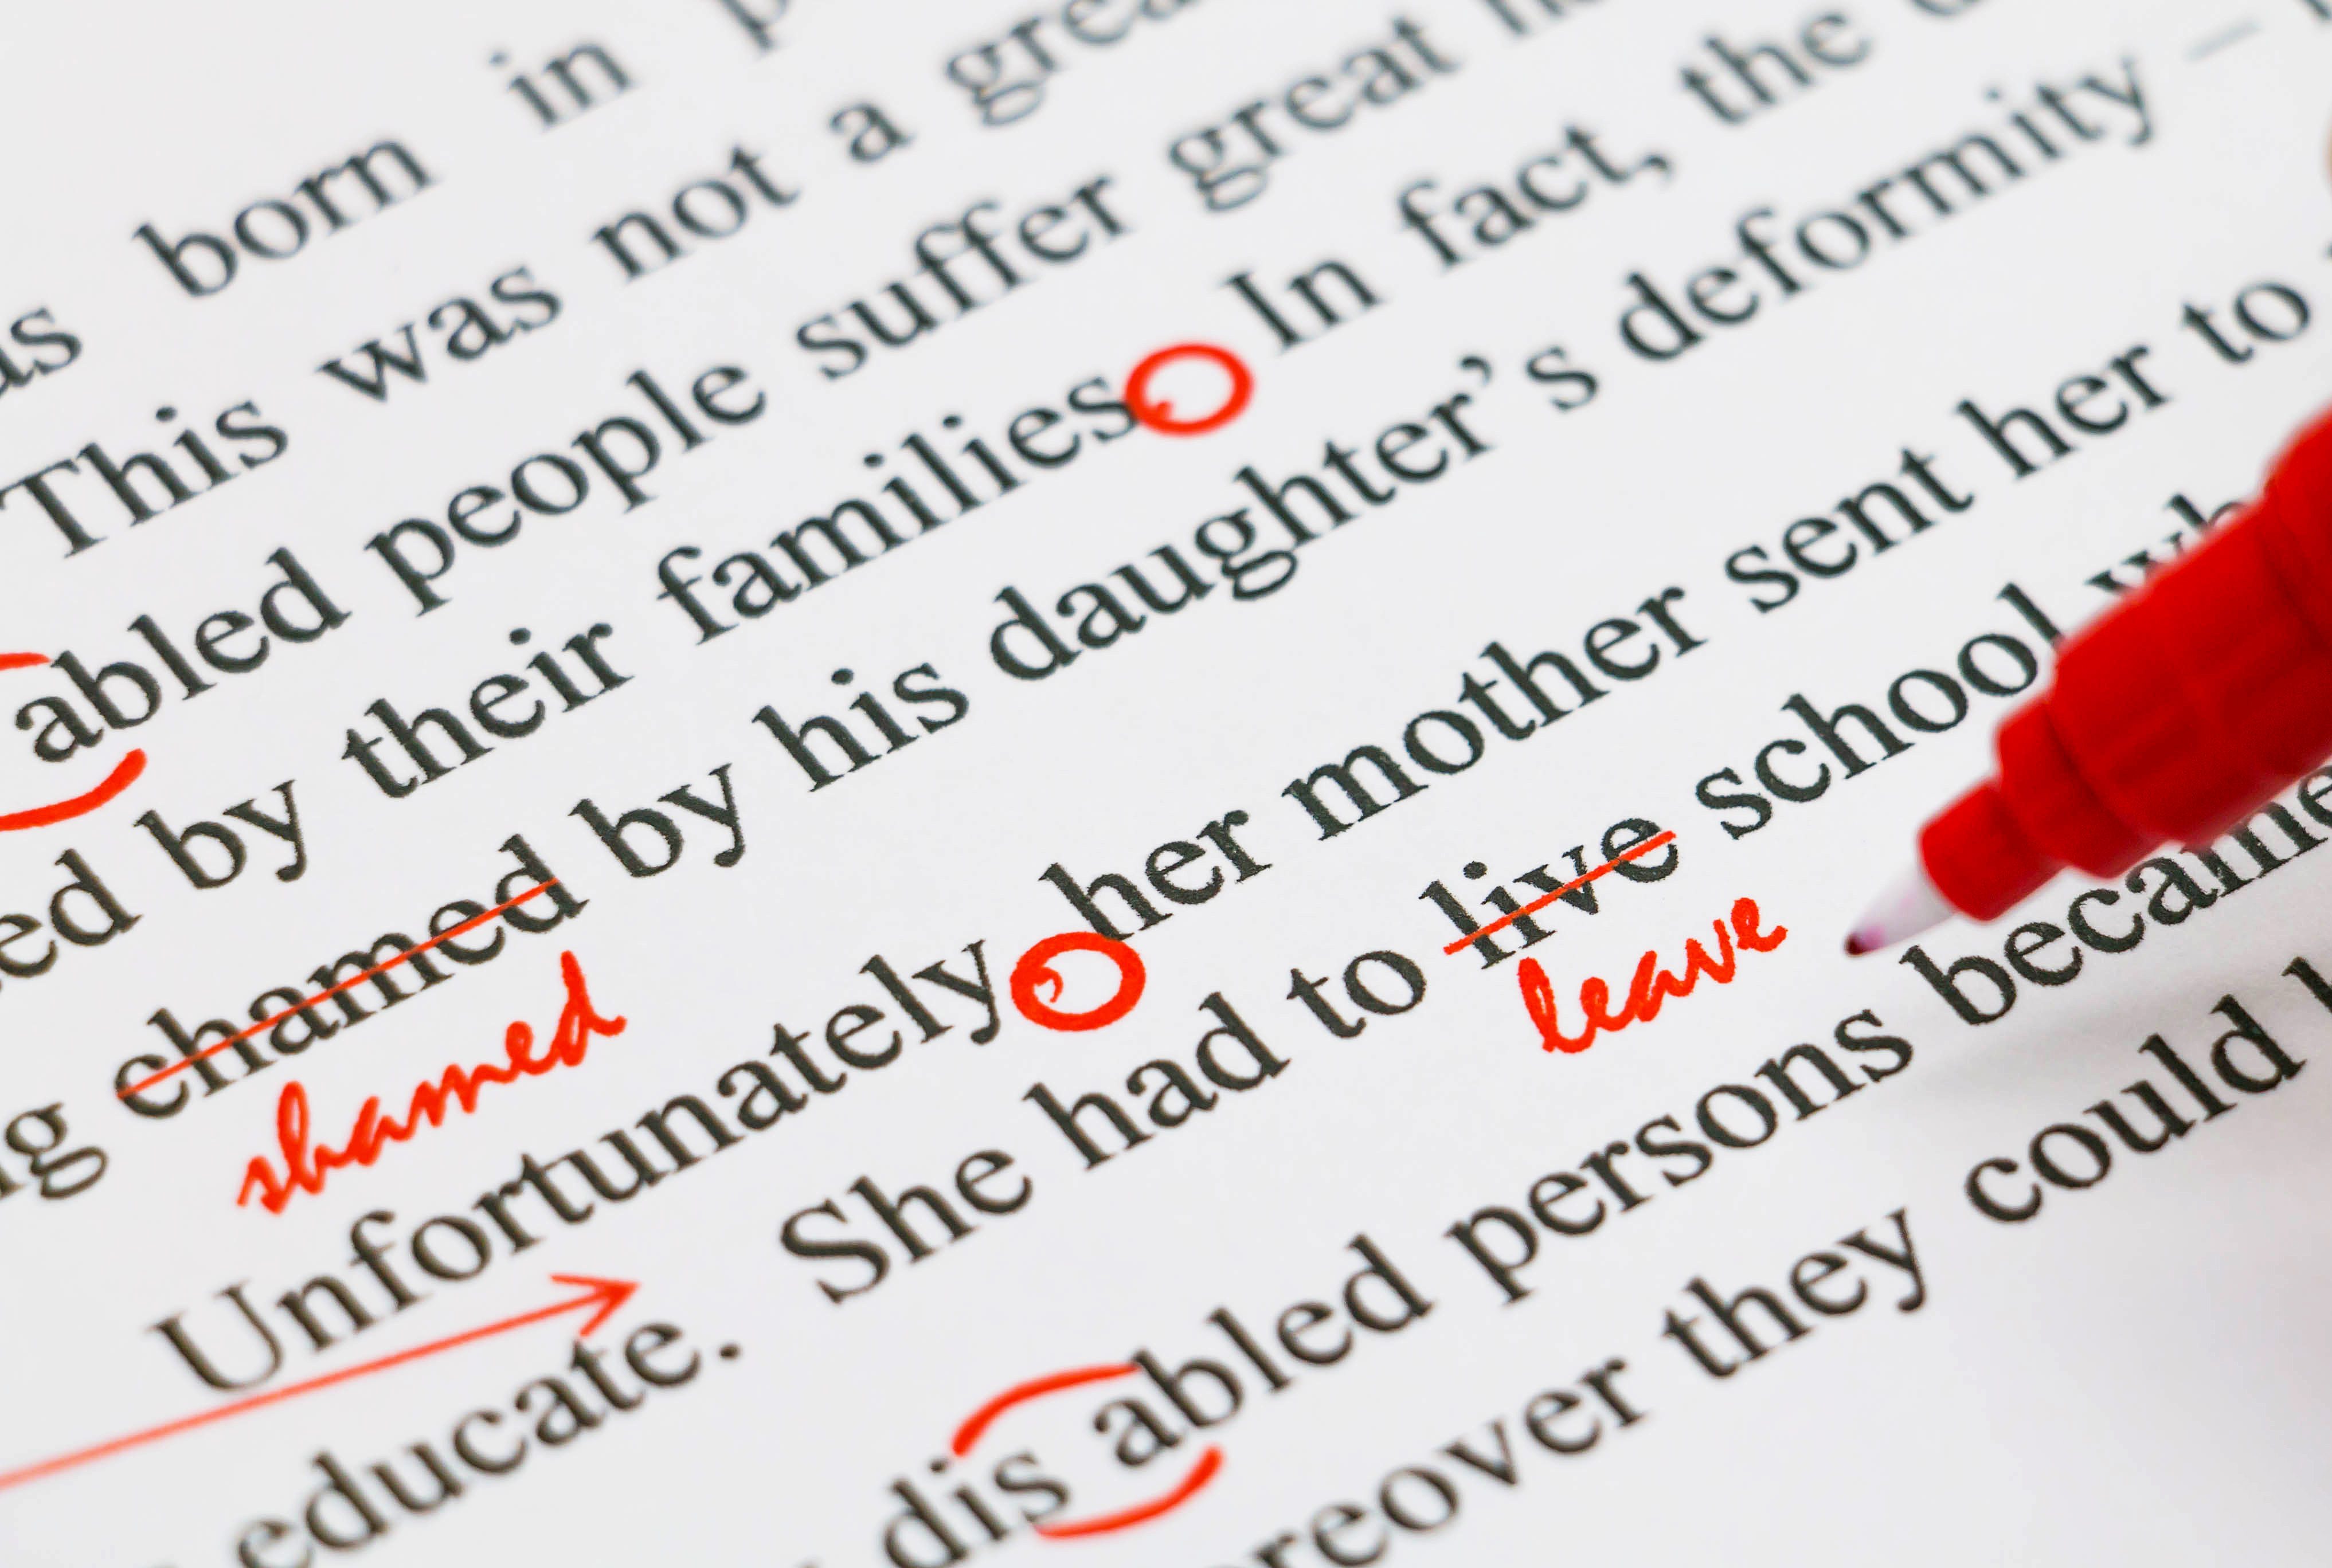 proofreading an essay